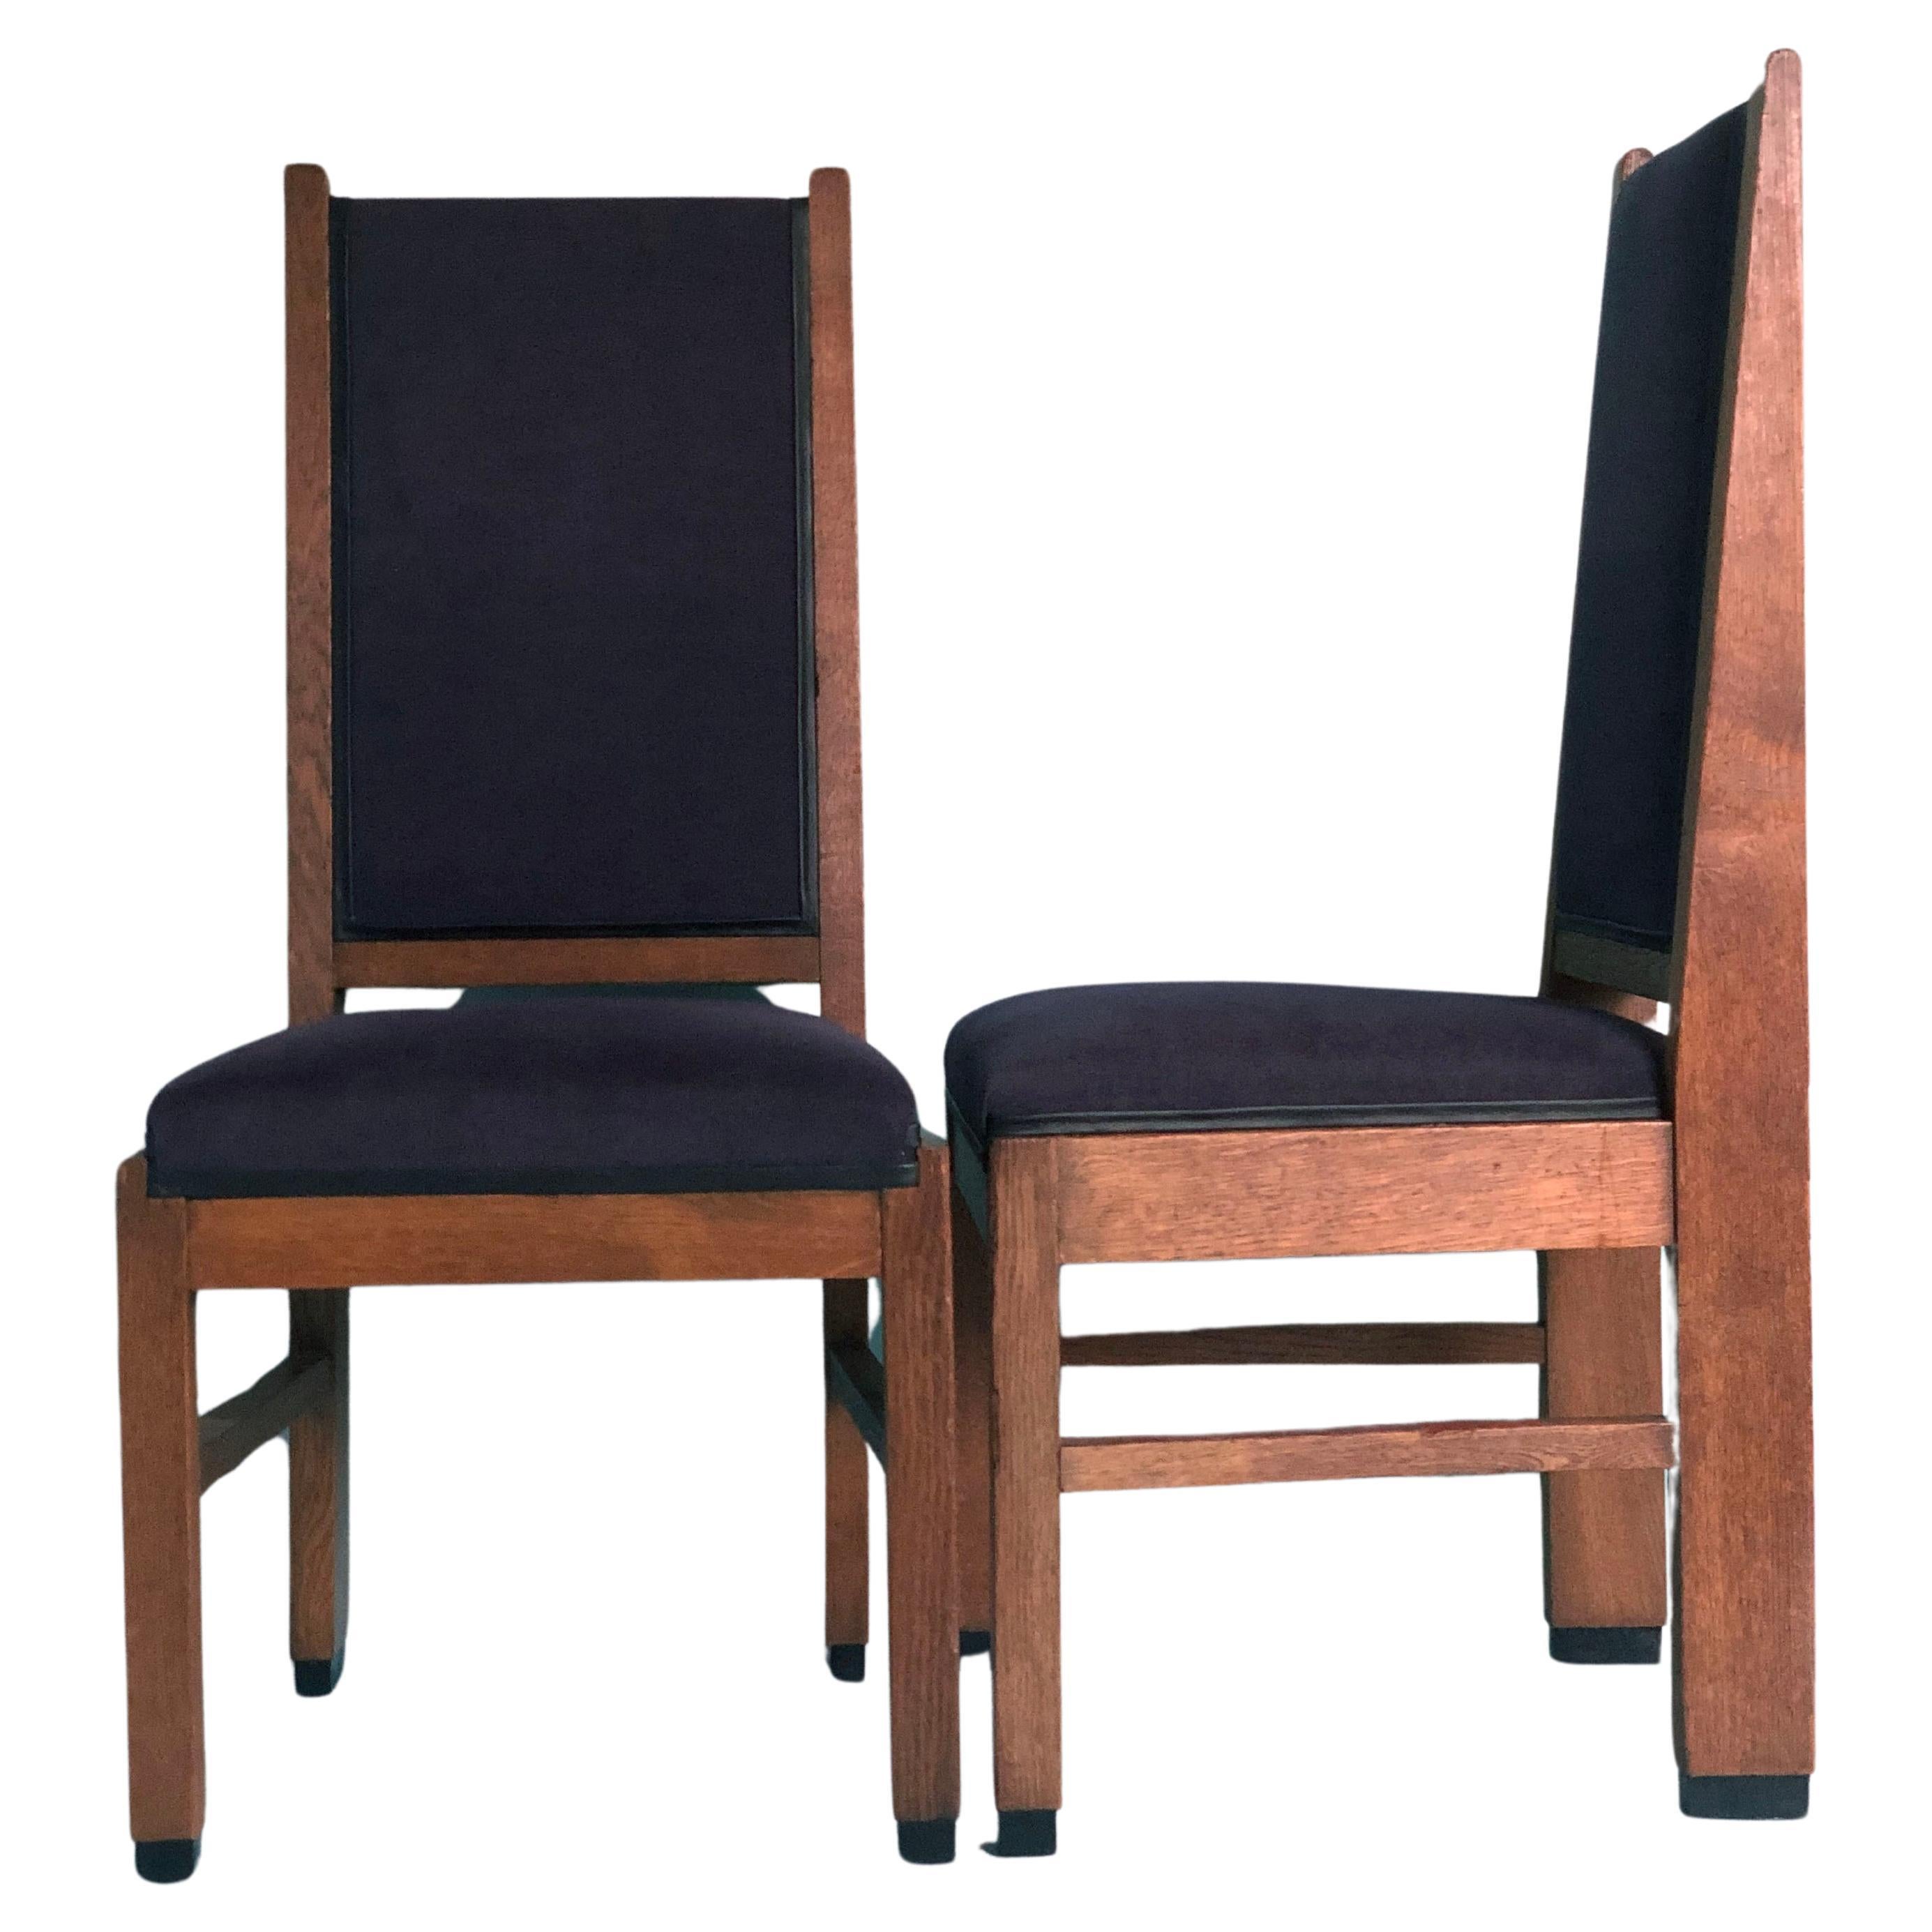 Art Deco Haagse School Dining Chair Frits Spanjaard 1930s Set of 2 For Sale